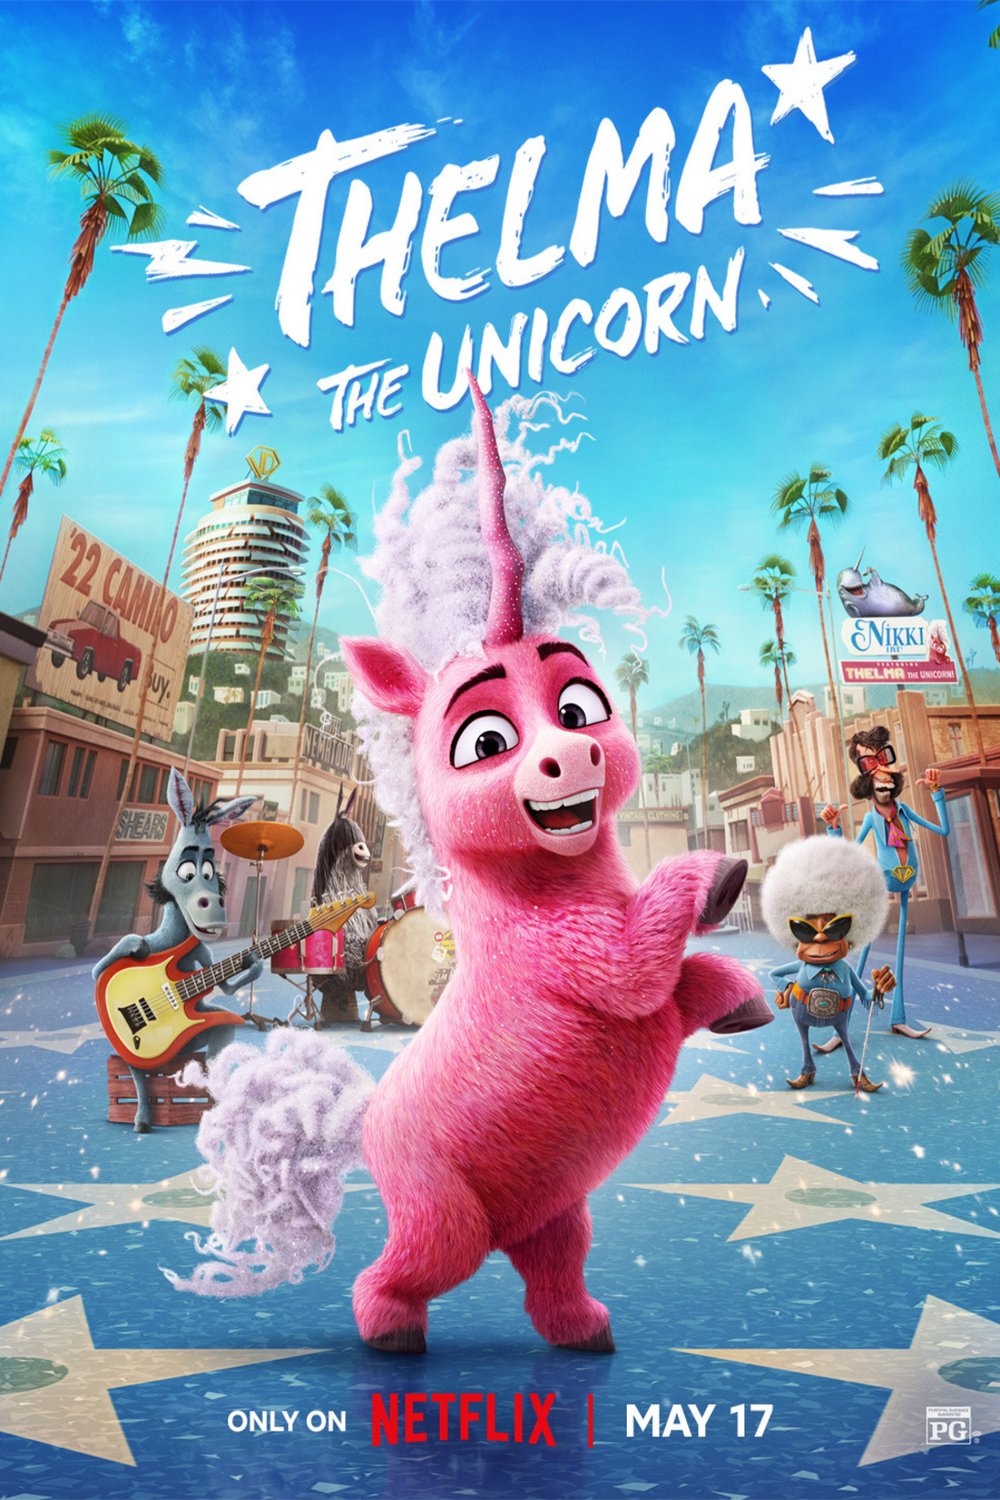 Poster of the movie Thelma the Unicorn